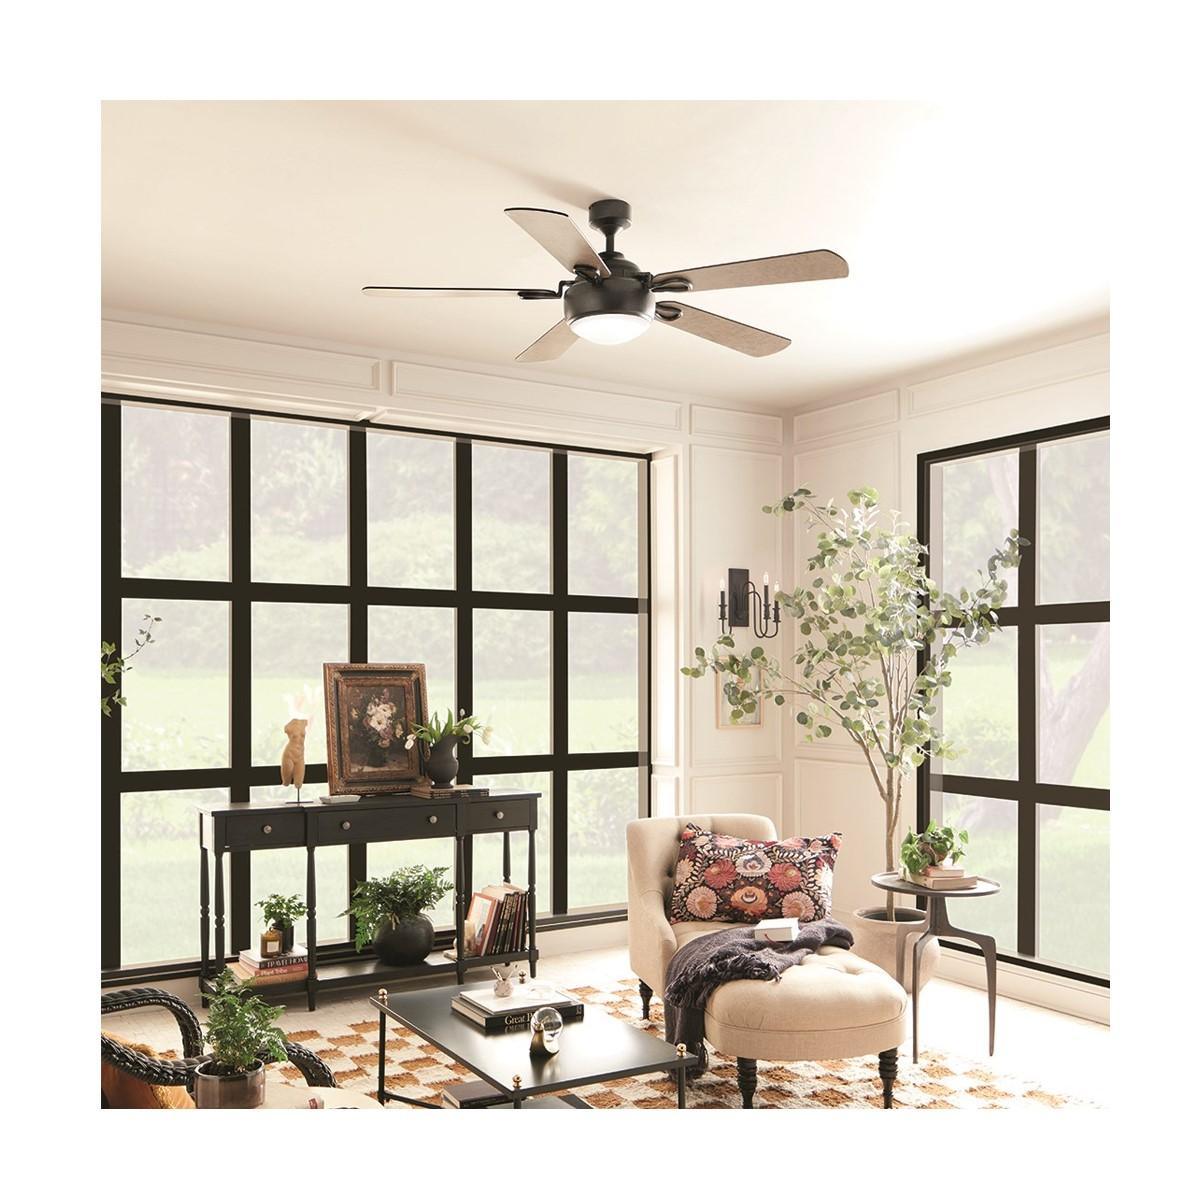 Humble 60 Inch Ceiling Fan With Light, Wall Control Included